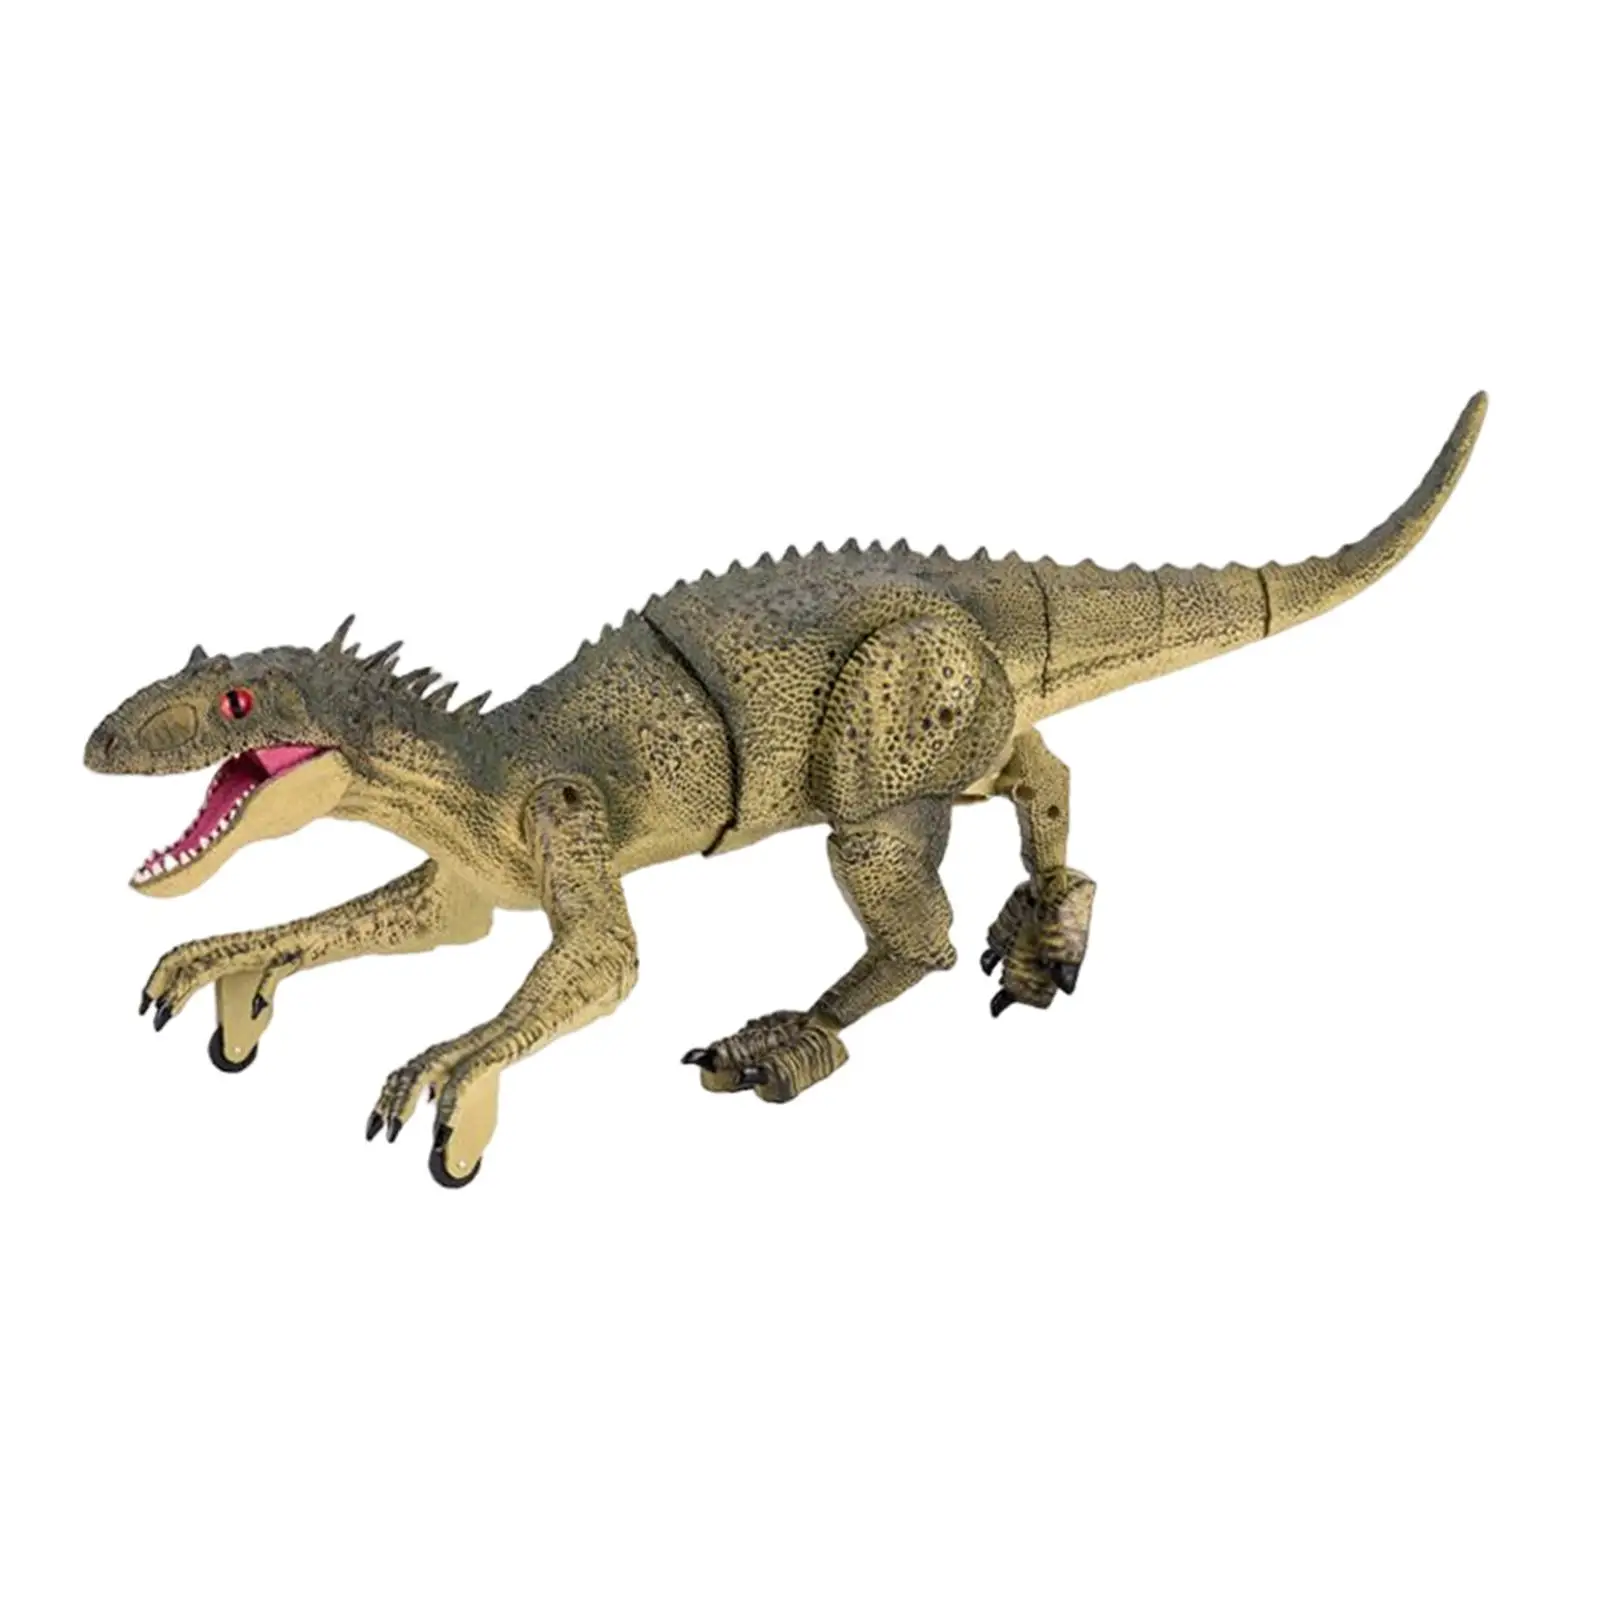 2.4G Dinosaur Toy Realistic with Light Intelligent with Sound Walking Dinosaur RC Electric Toy for Girls Boys Children Gifts